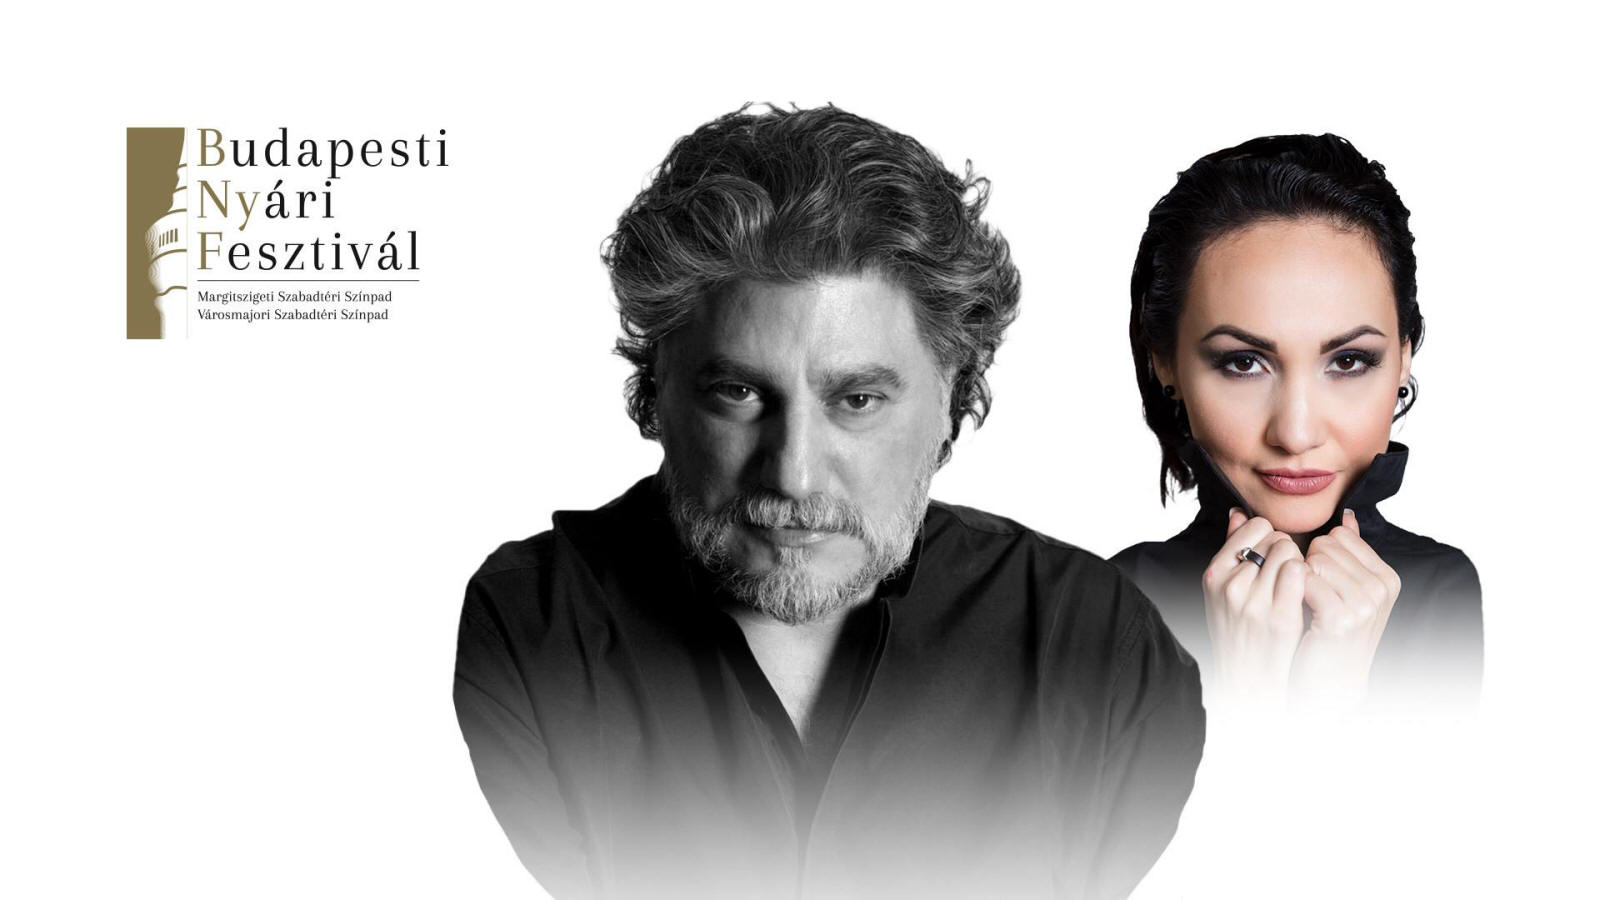 Jos Cura advert for June 2019 performances of Turandot in Budapest.